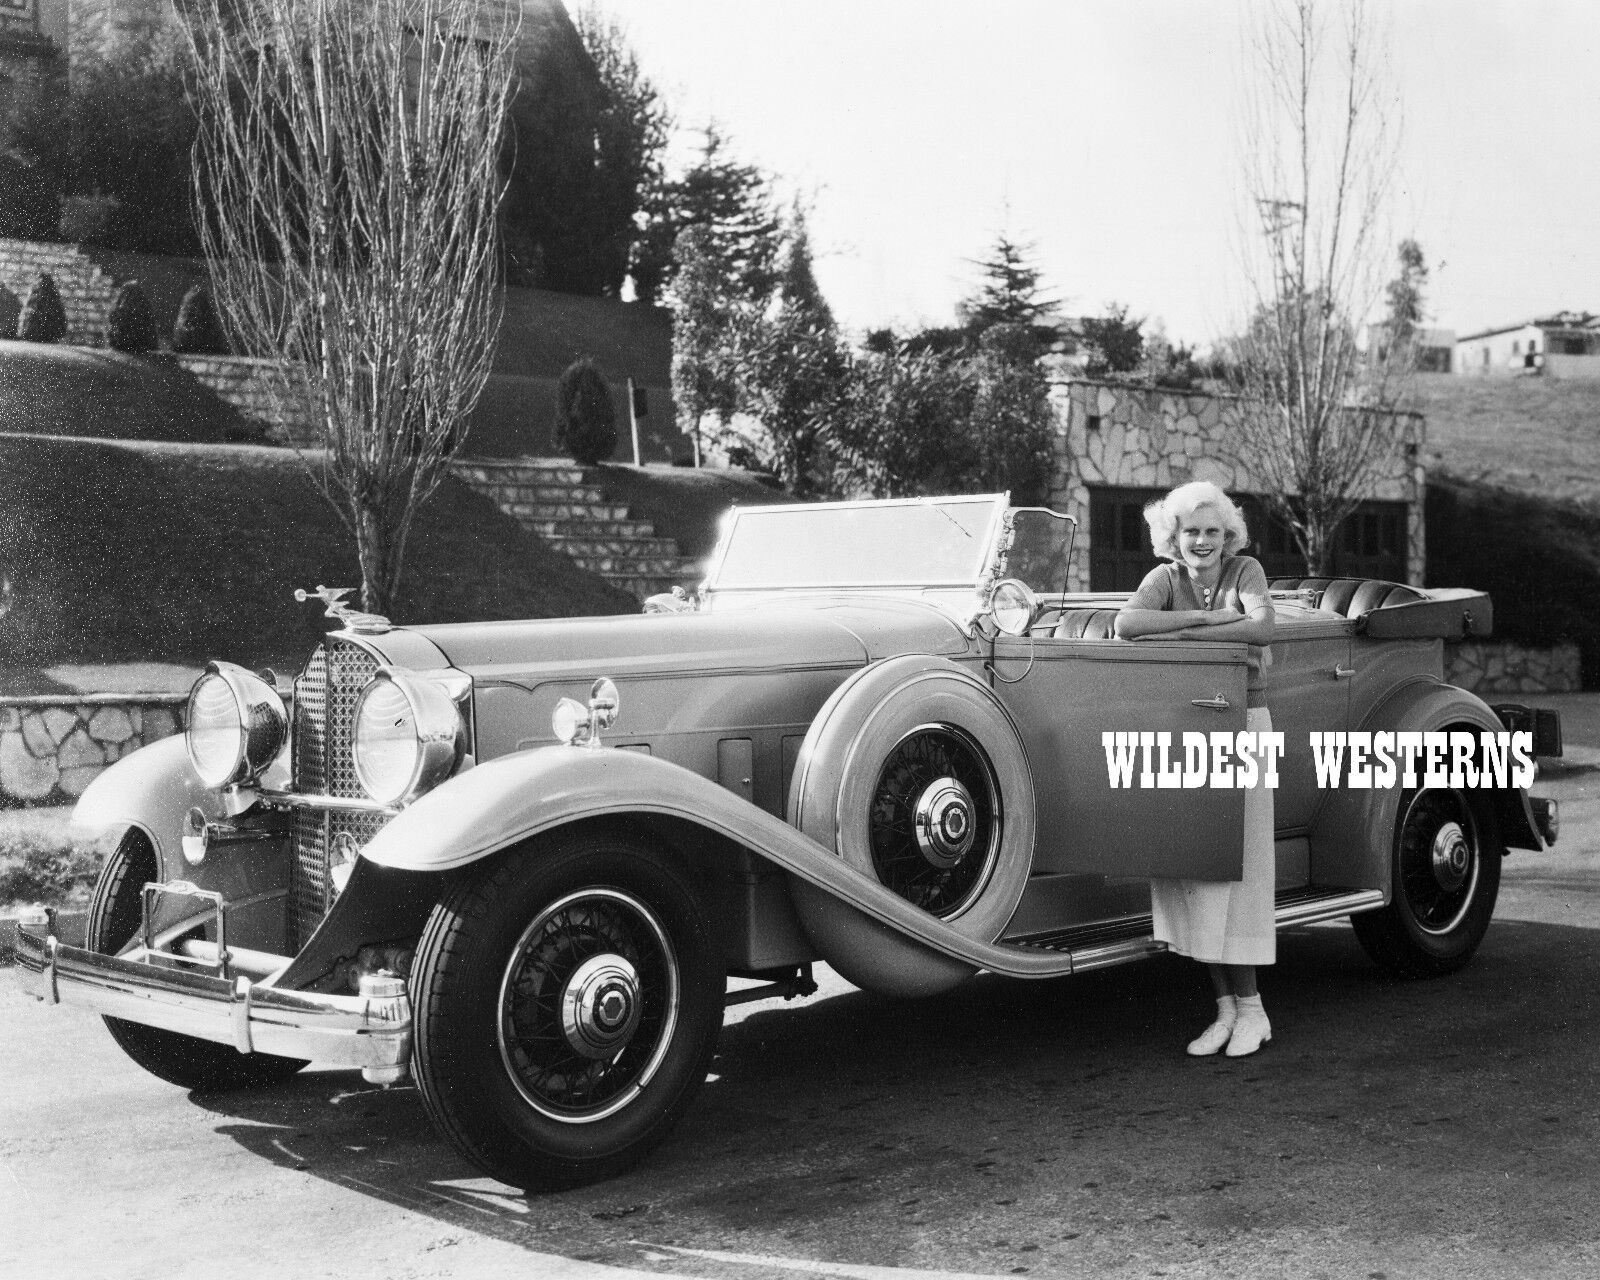 JEAN HARLOW Rare Candid Pose PHOTO Sexy ANTIQUE CLASSIC CAR Packard Convertible 